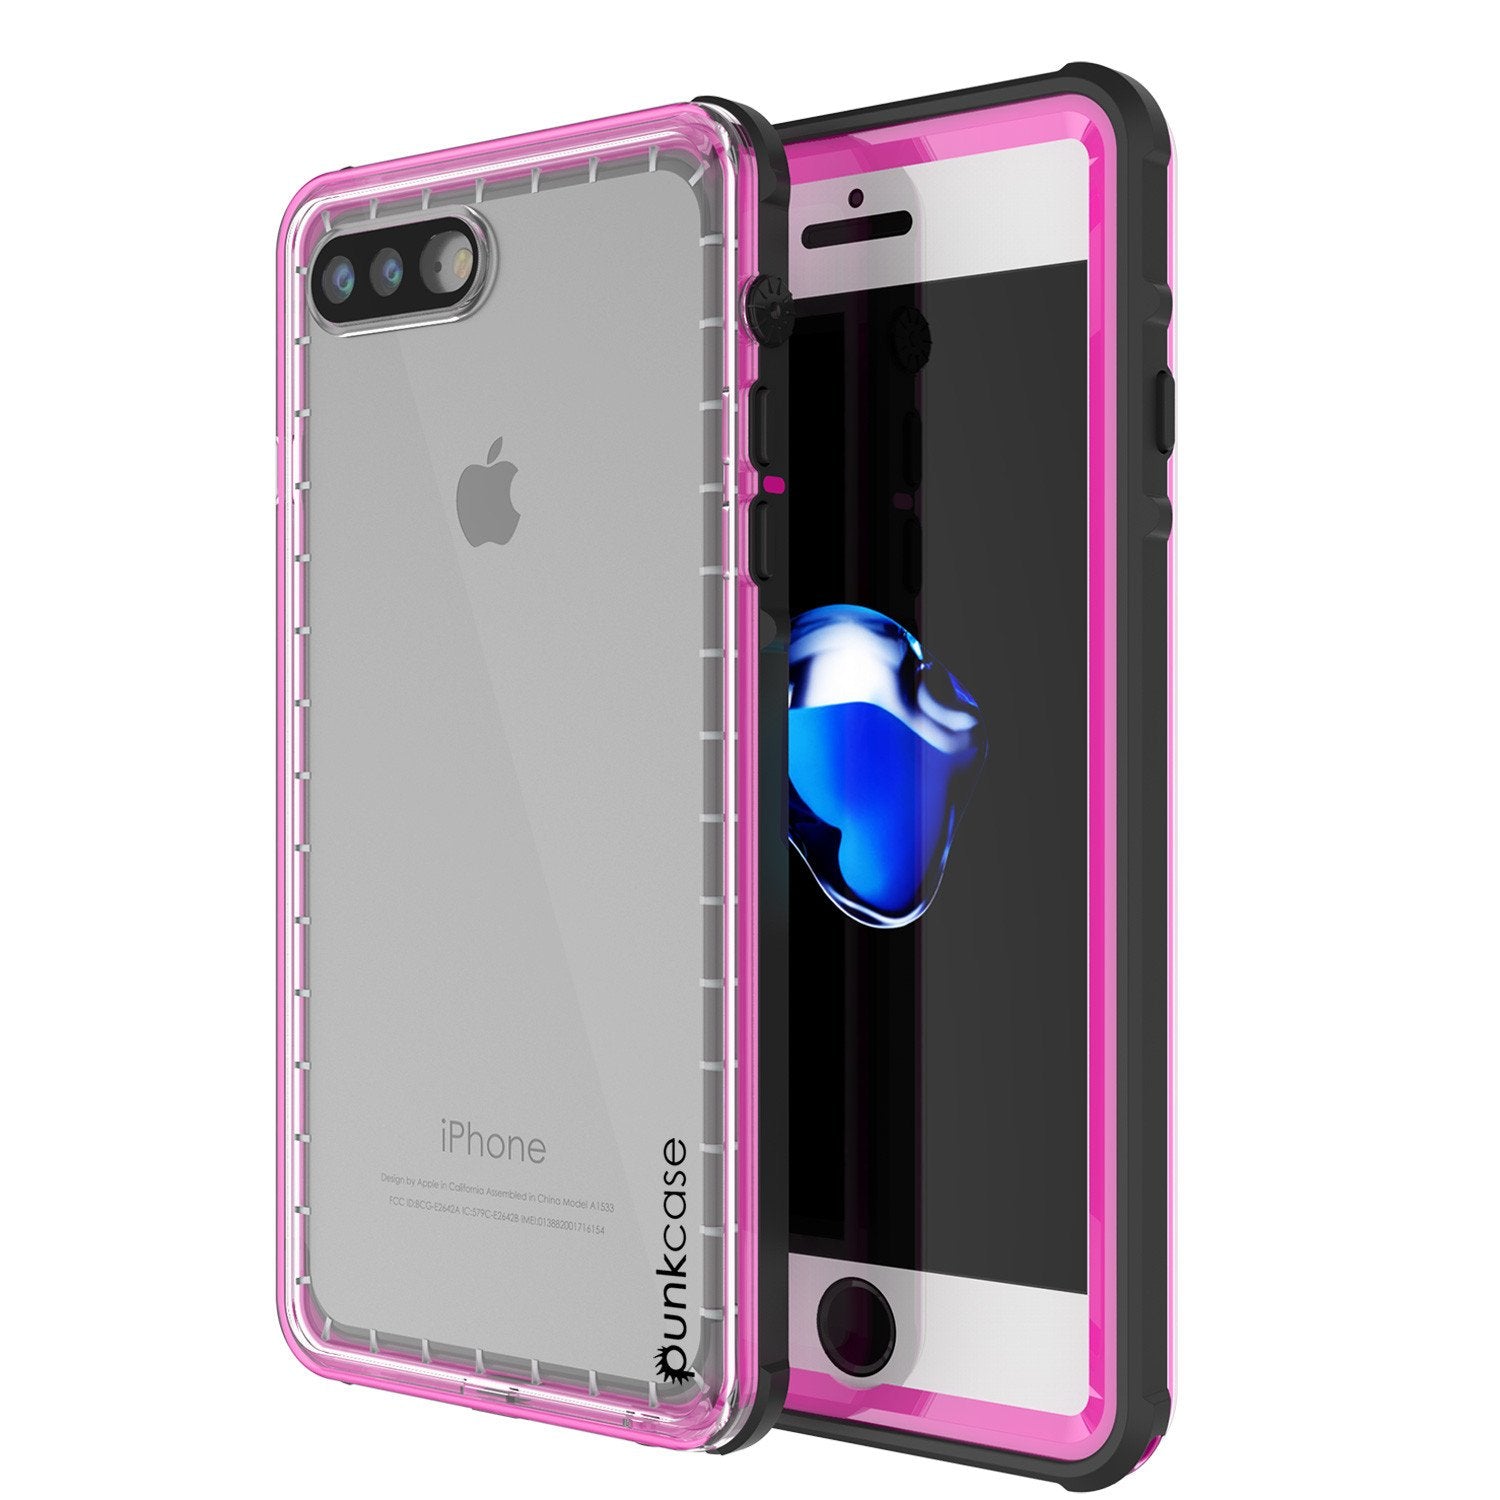 iPhone 7+ Plus Waterproof Case, PUNKcase CRYSTAL Pink W/ Attached Screen Protector  | Warranty - PunkCase NZ